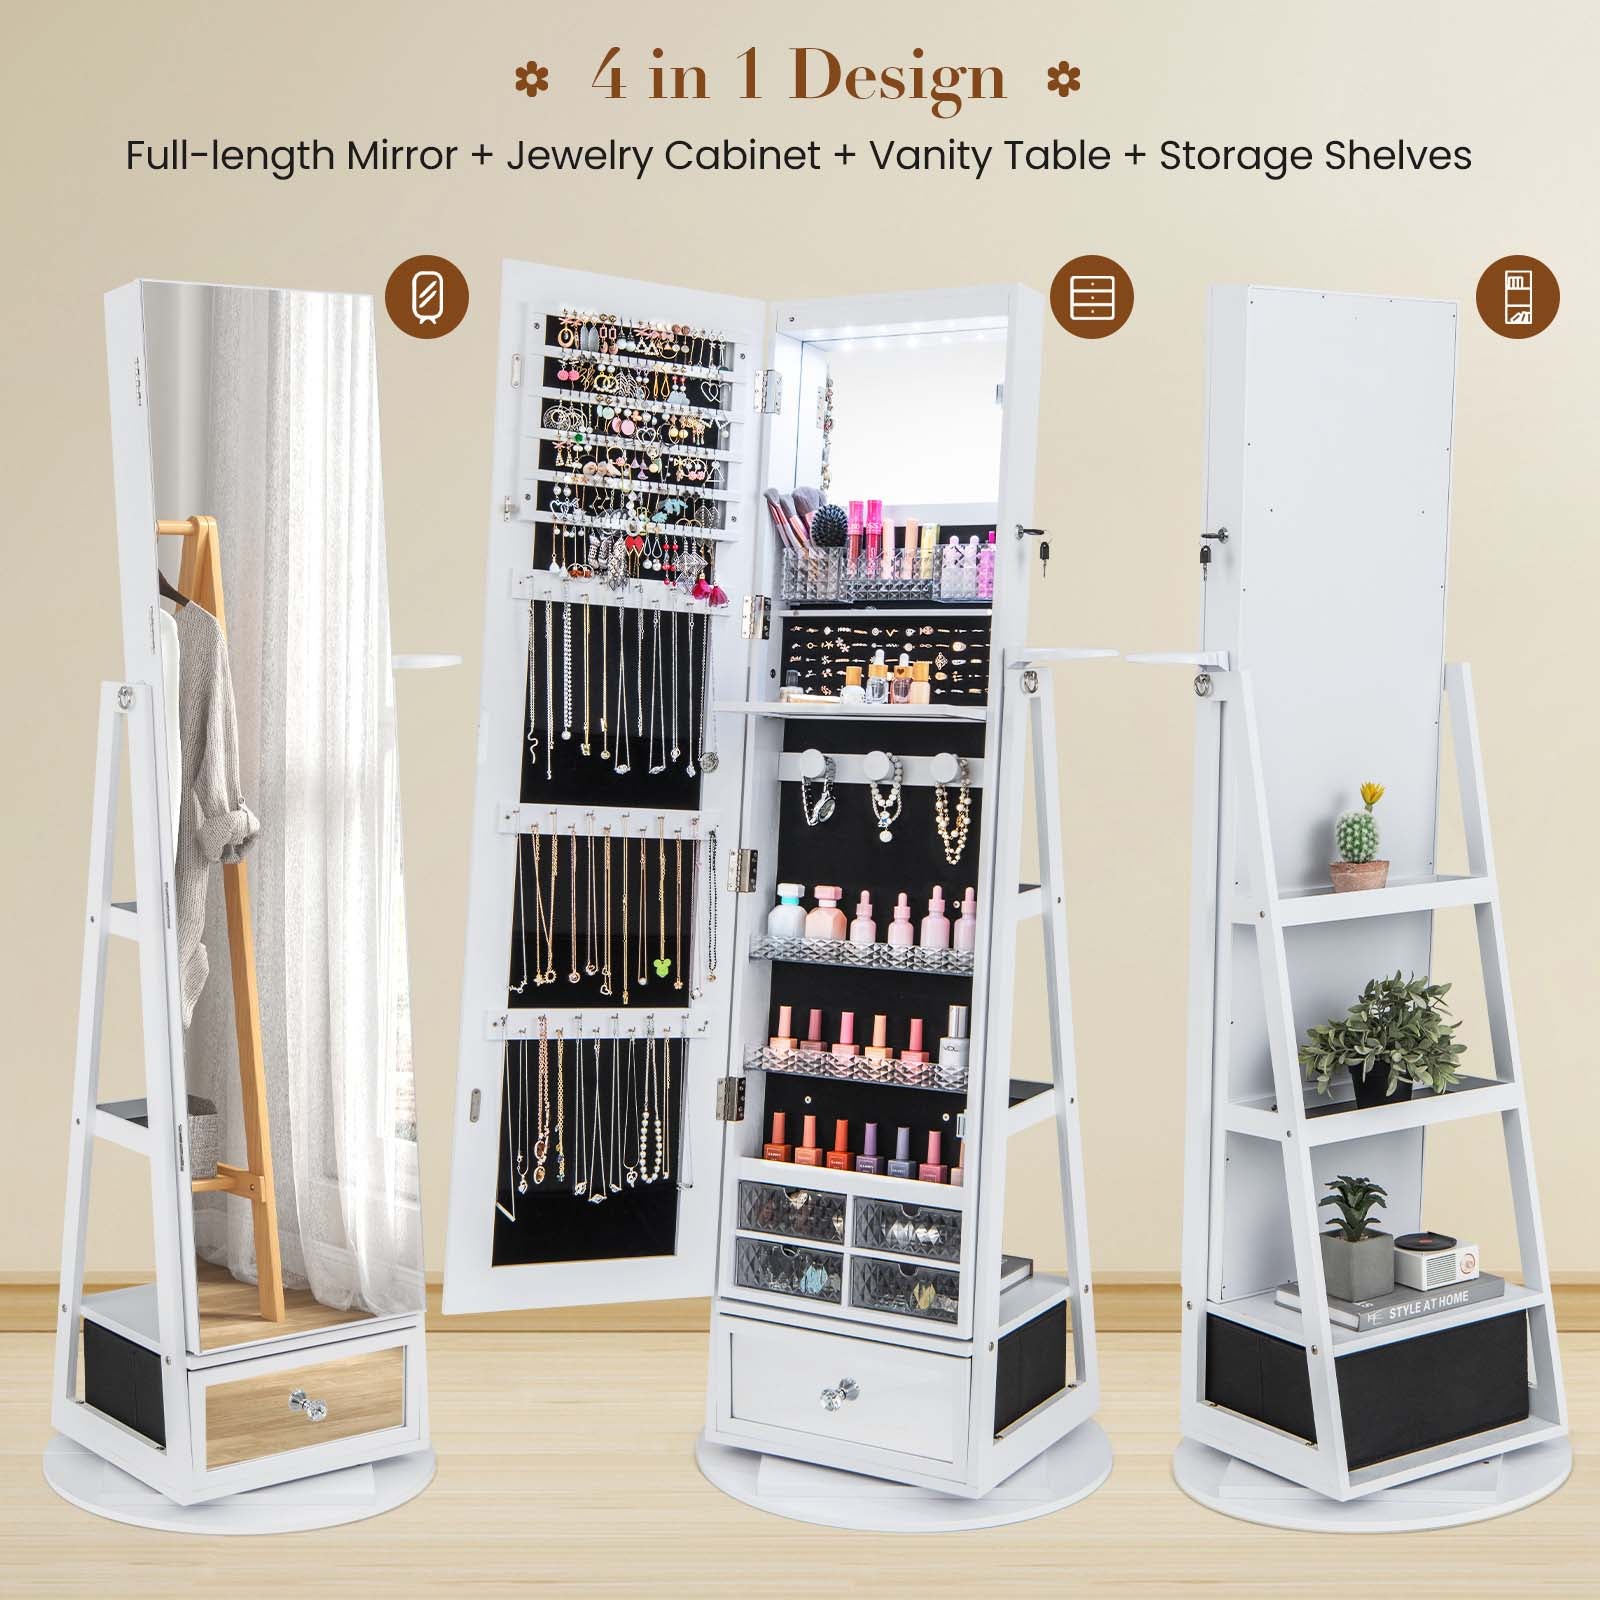 360° Lockable Swivel Jewelry Cabinet Floor Standing Armoire with Full-Length Mirror